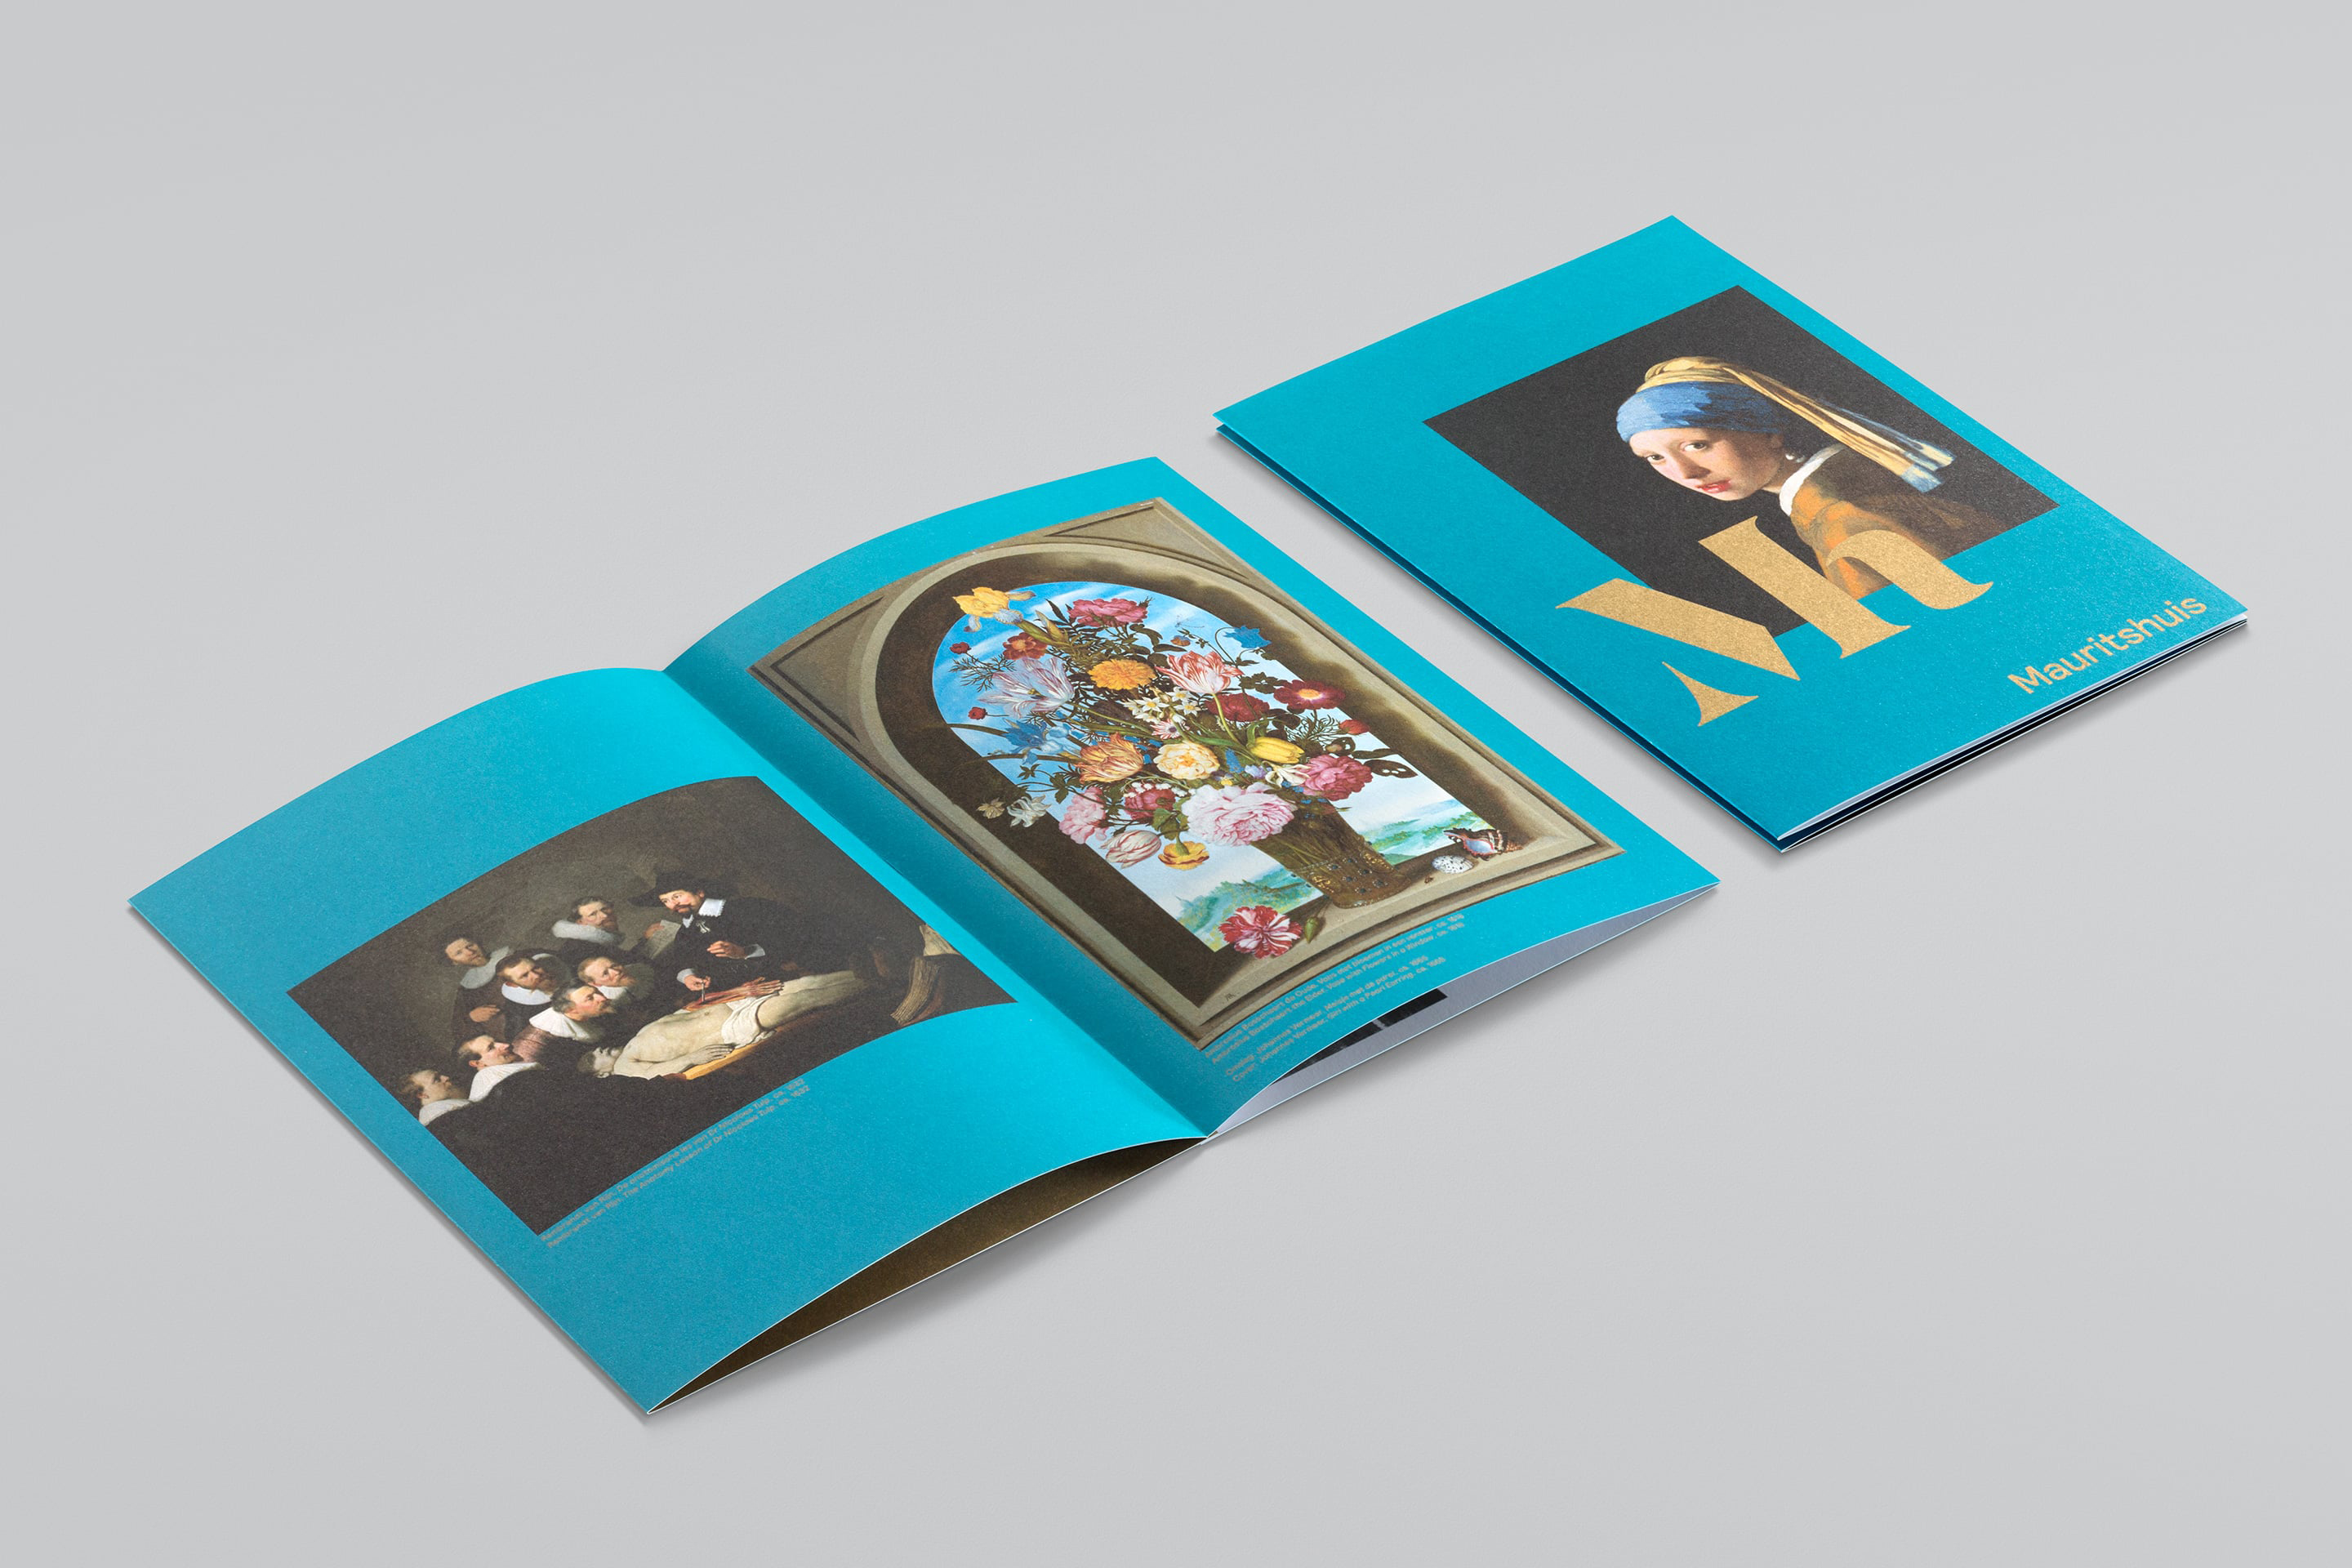 studio dumbar design visual brand identity for Mauritshuis Royal Picture Gallery brocure design